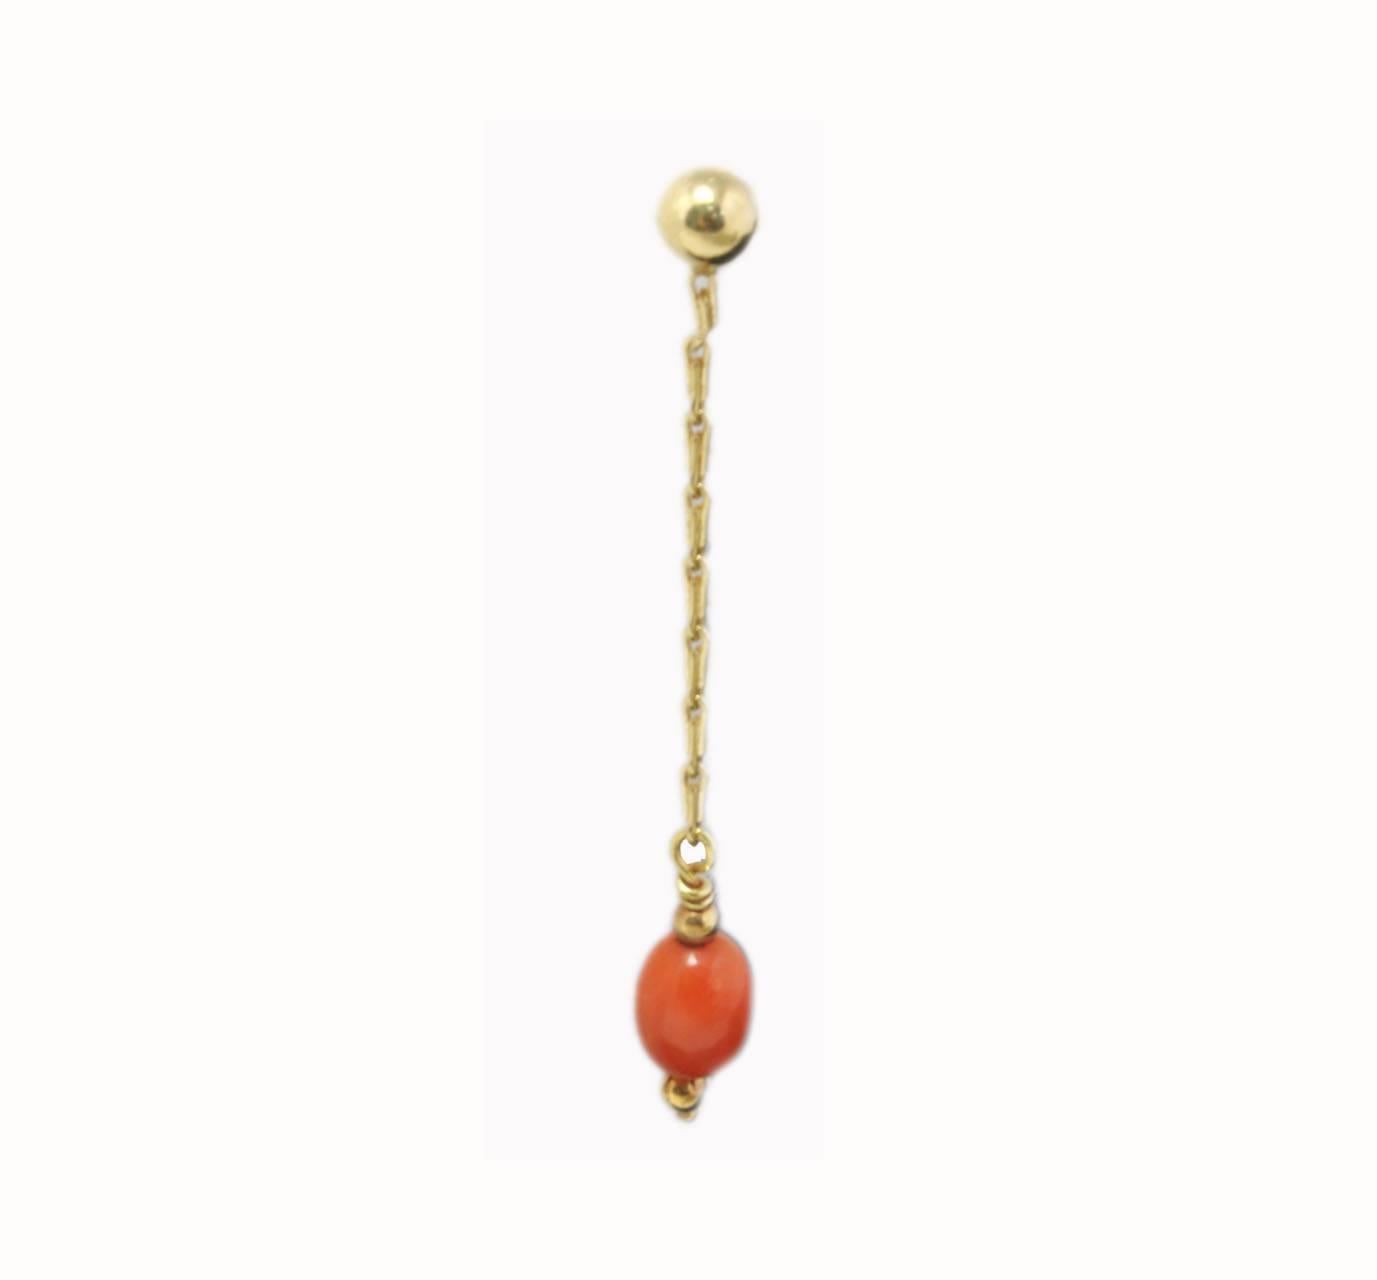 Classic drop earrings composed of a single chain of 18Kt yellow gold, holding a single sphere of coral.
Tot weight both earrings 2.8 g, single one 1.4 g
Coral 0.40 g

Rf. hha